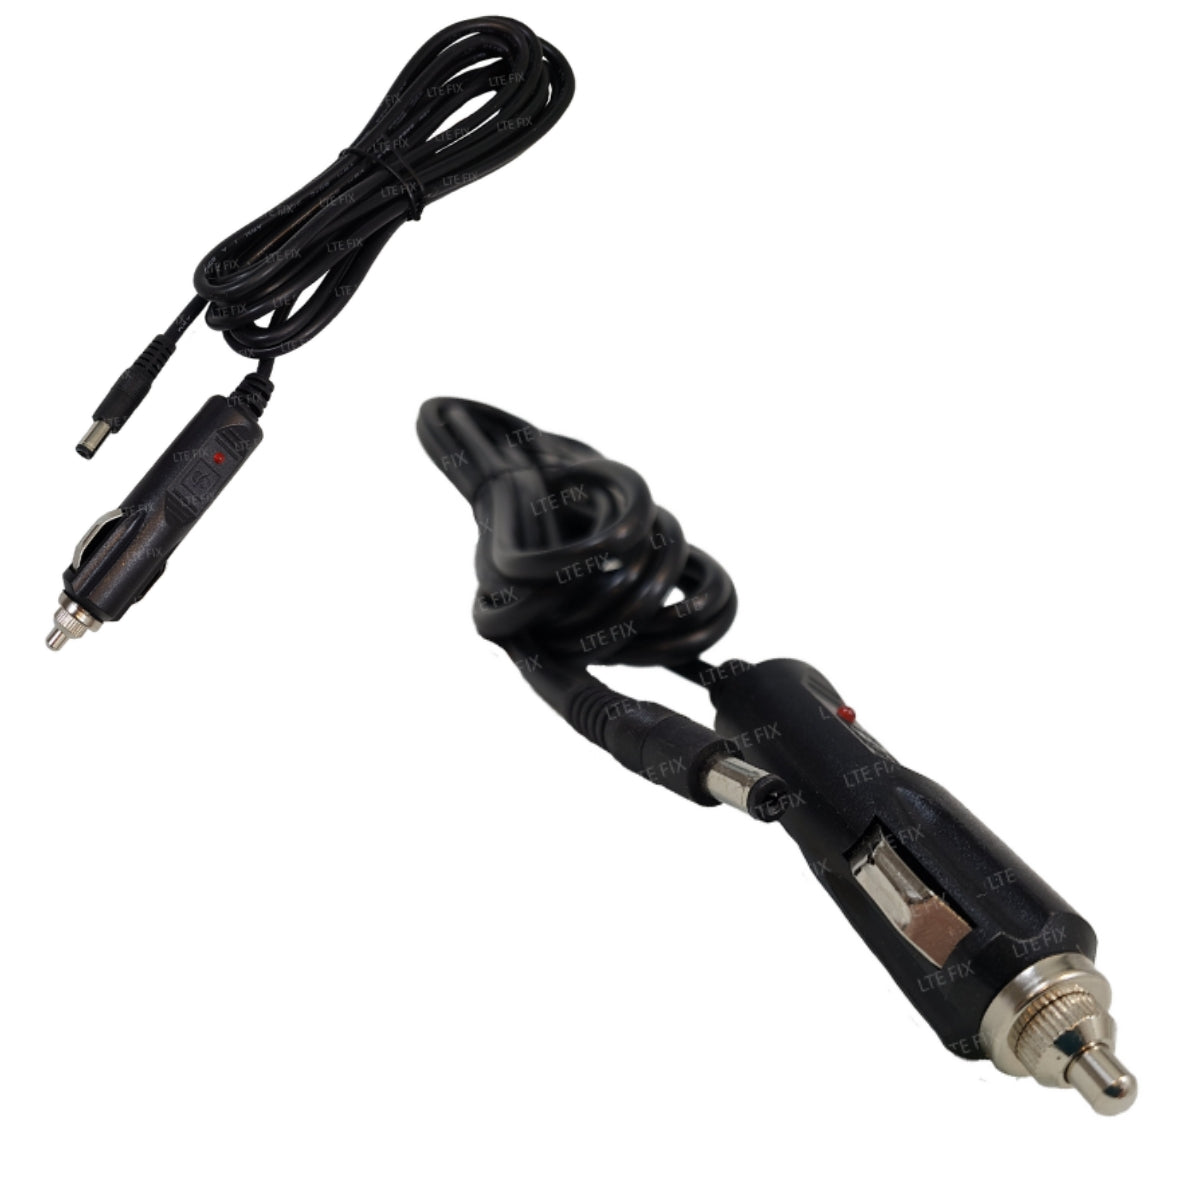 DC Car Charger Auto Power Supply Cable,12-24V 10FT Car Cigarette Lighter Male Plug to DC 5.5mm x 2.1mm Connector Plug